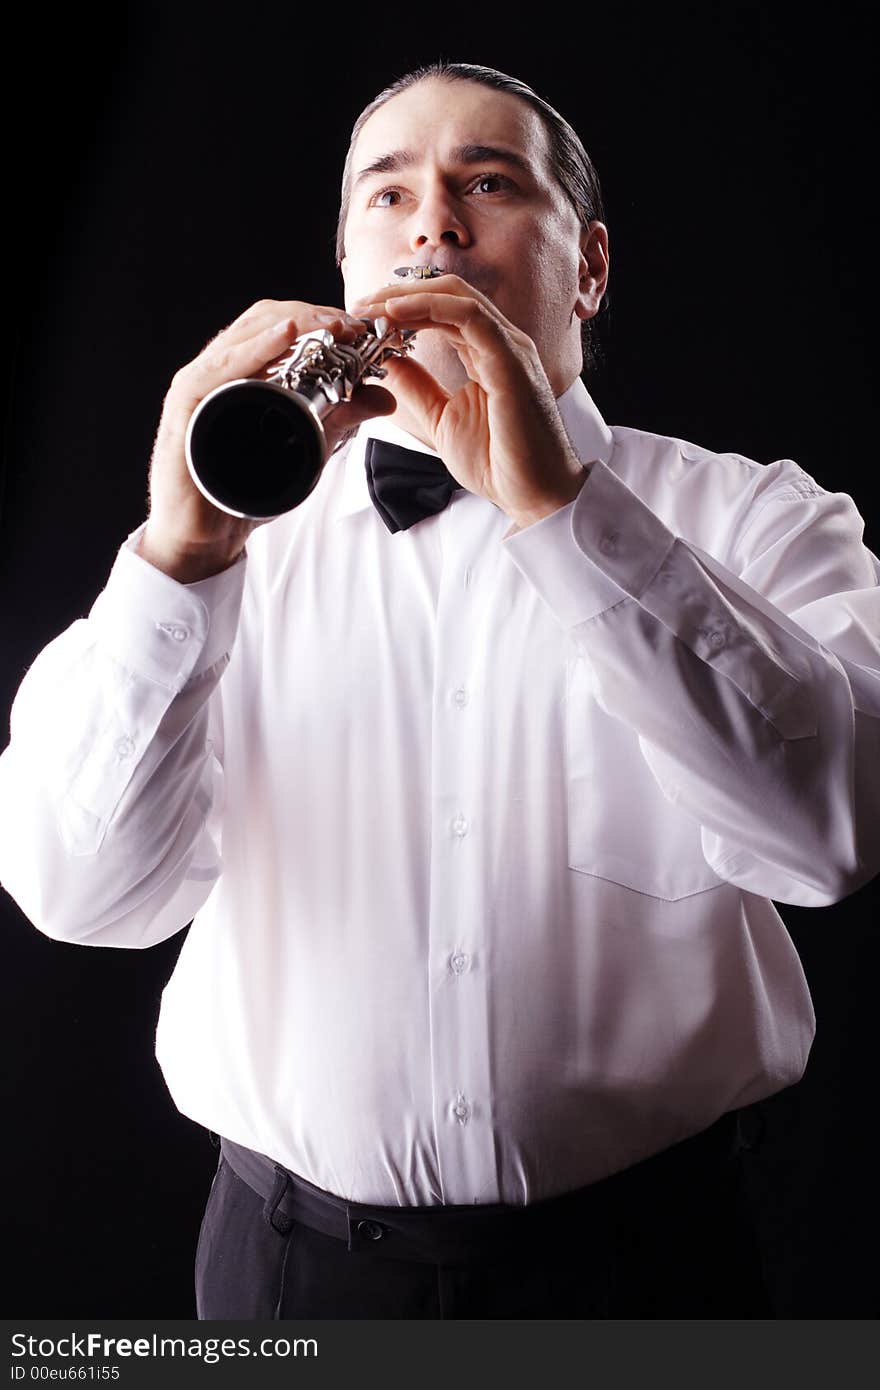 A man playing his wind instrument with expression. A man playing his wind instrument with expression.